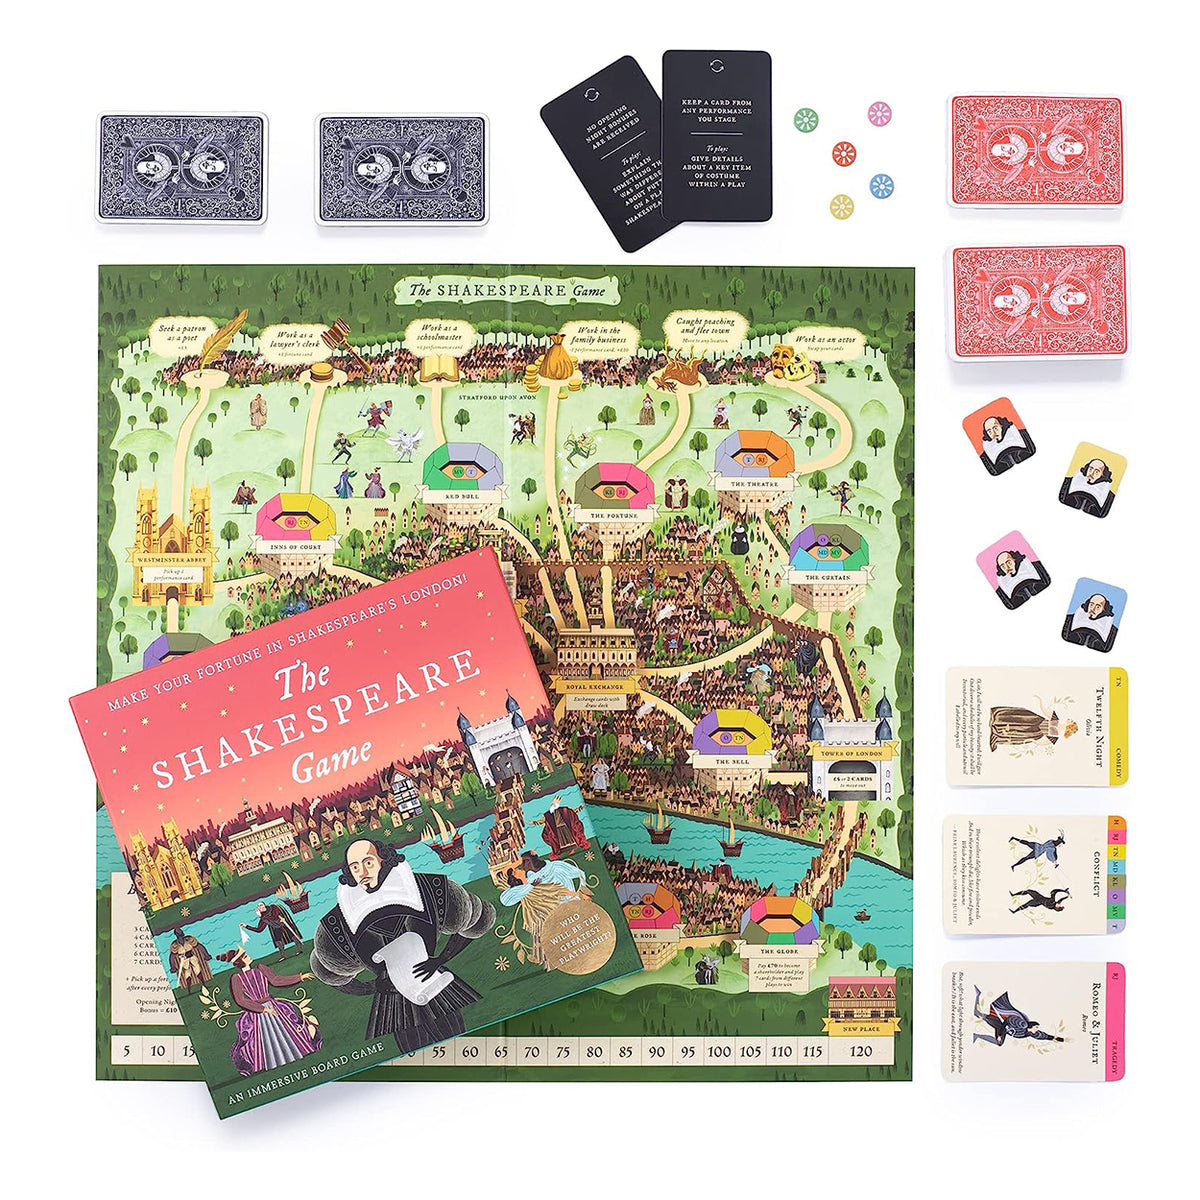 Image showing the contents of The Shakespeare Game